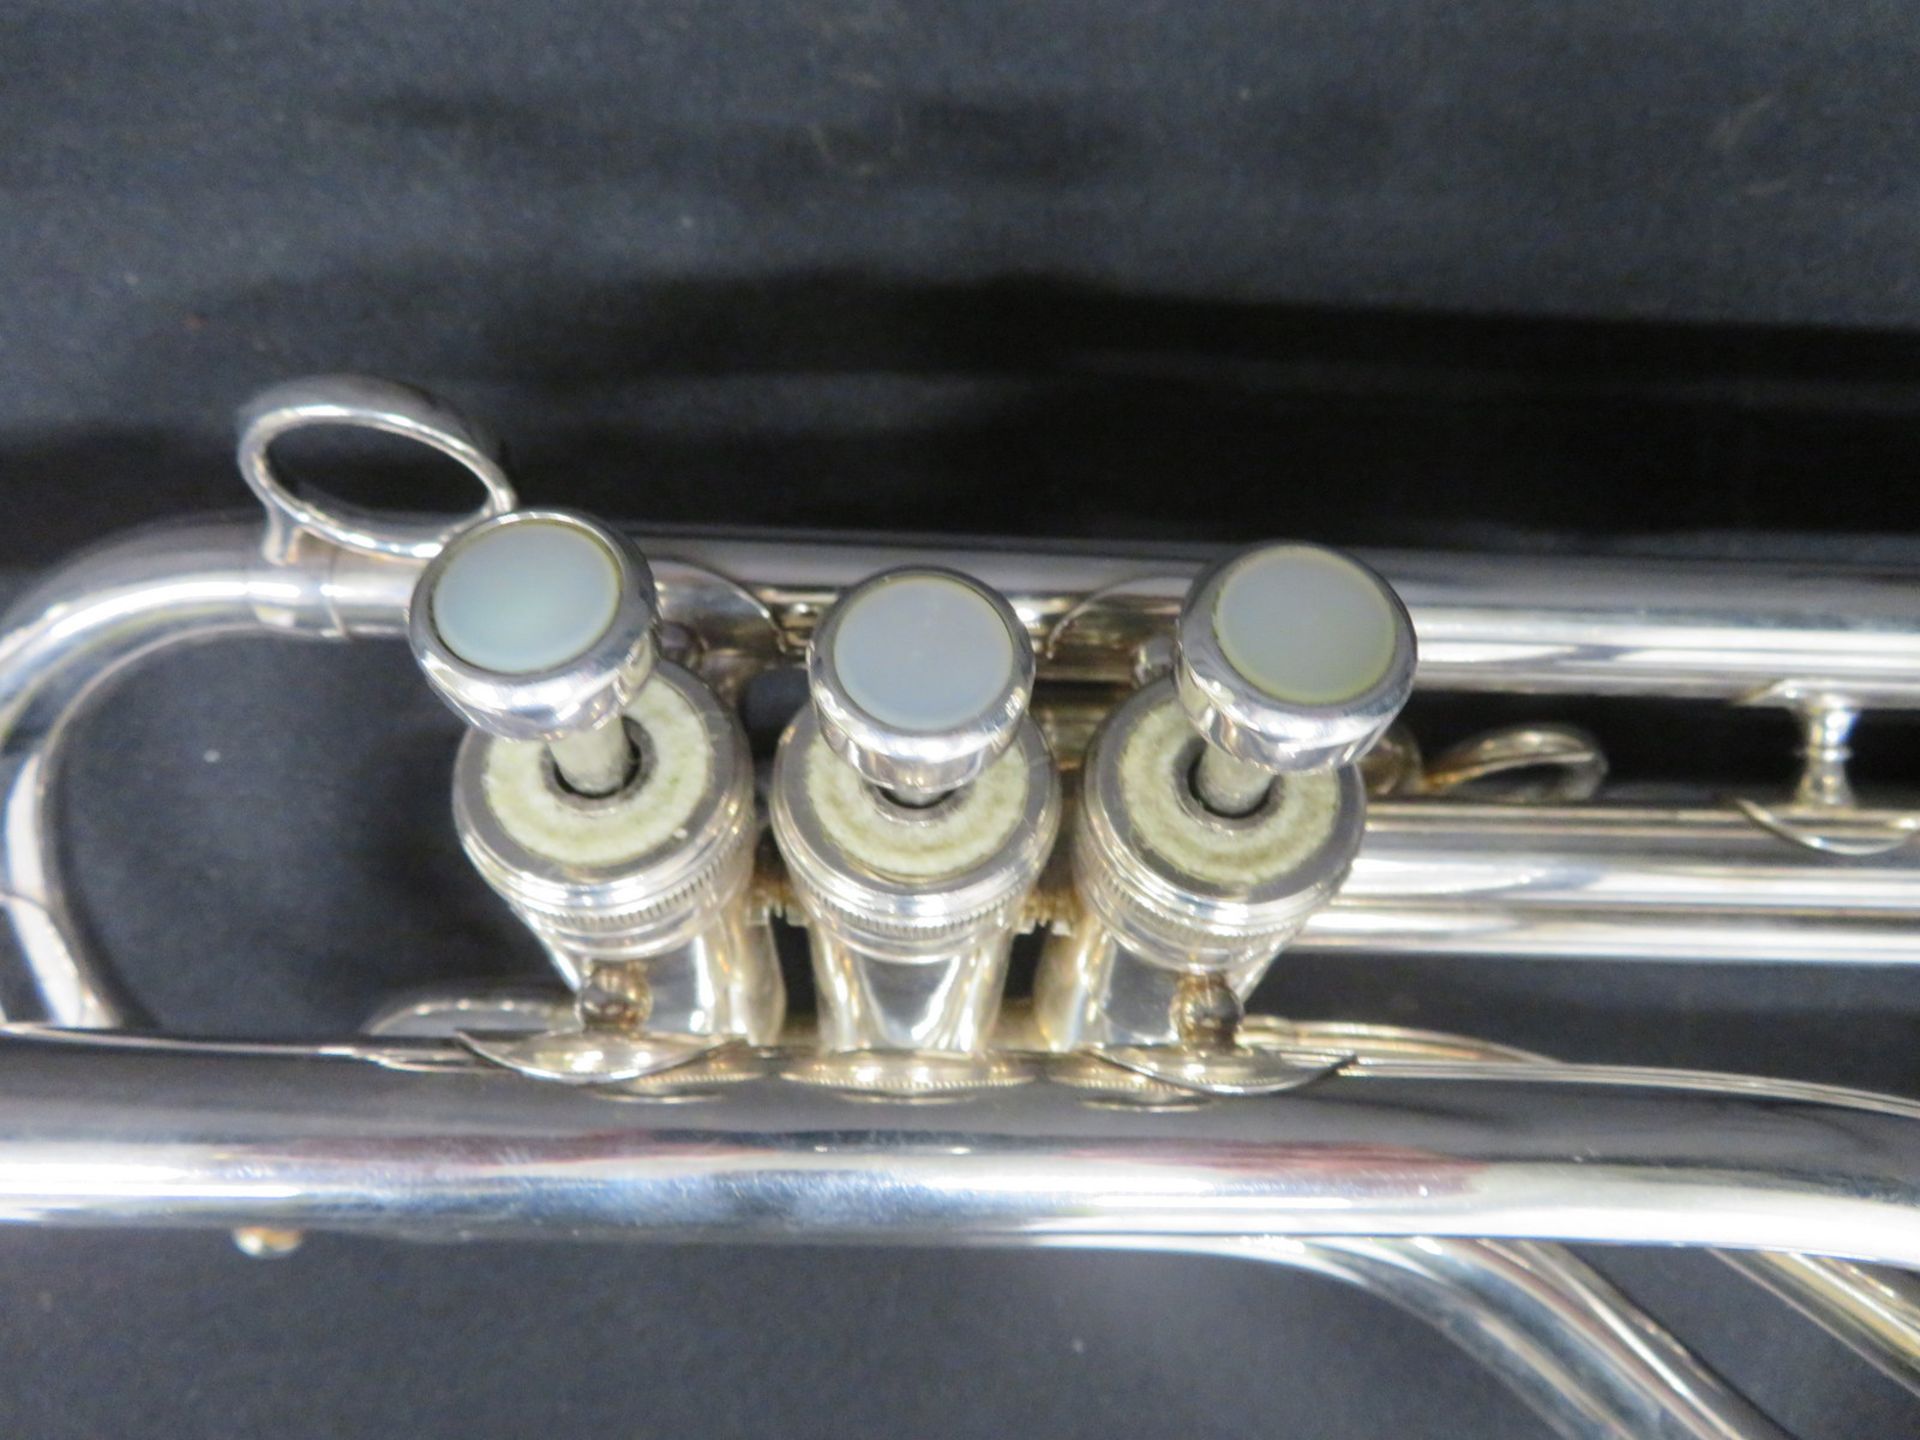 Boosey & Hawkes Besson 700 London tenor fanfare trumpet with case. Serial number: 707-721126. - Image 7 of 18